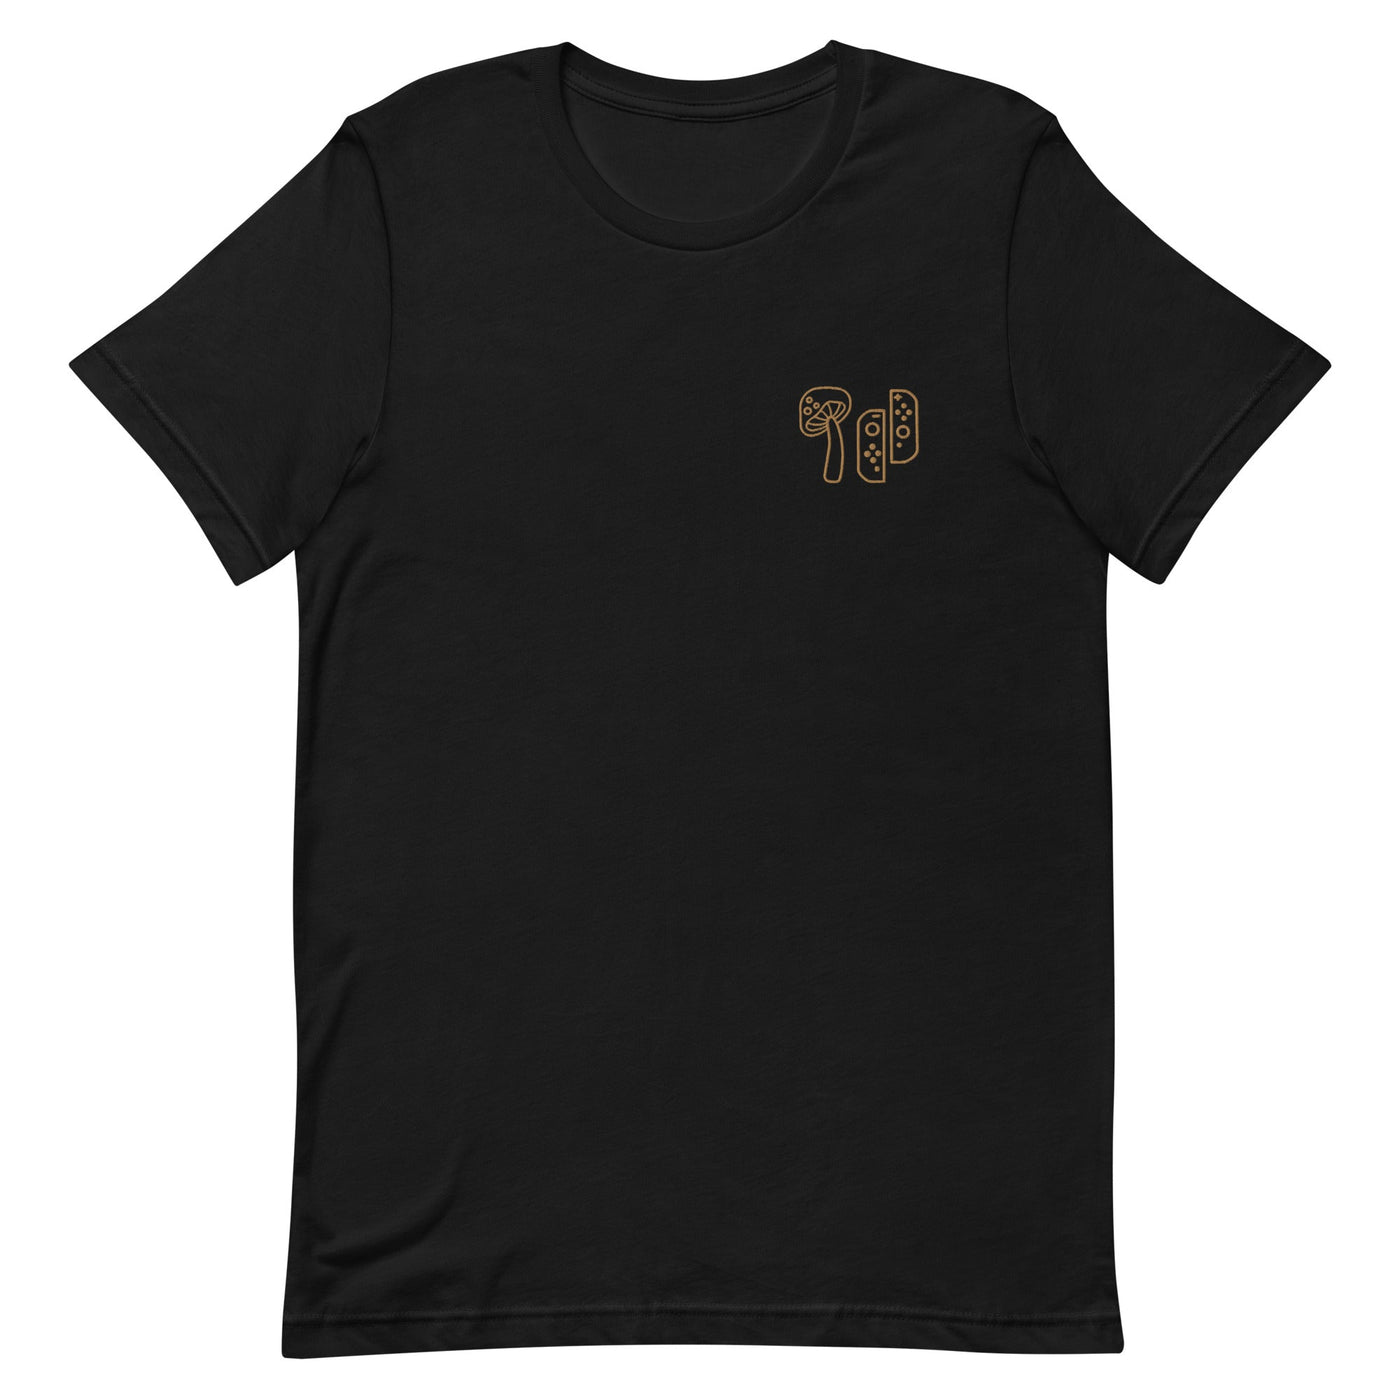 Mushroom & Switch | Embroidered Unisex t-shirt | Cozy Gamer Threads and Thistles Inventory Black XS 